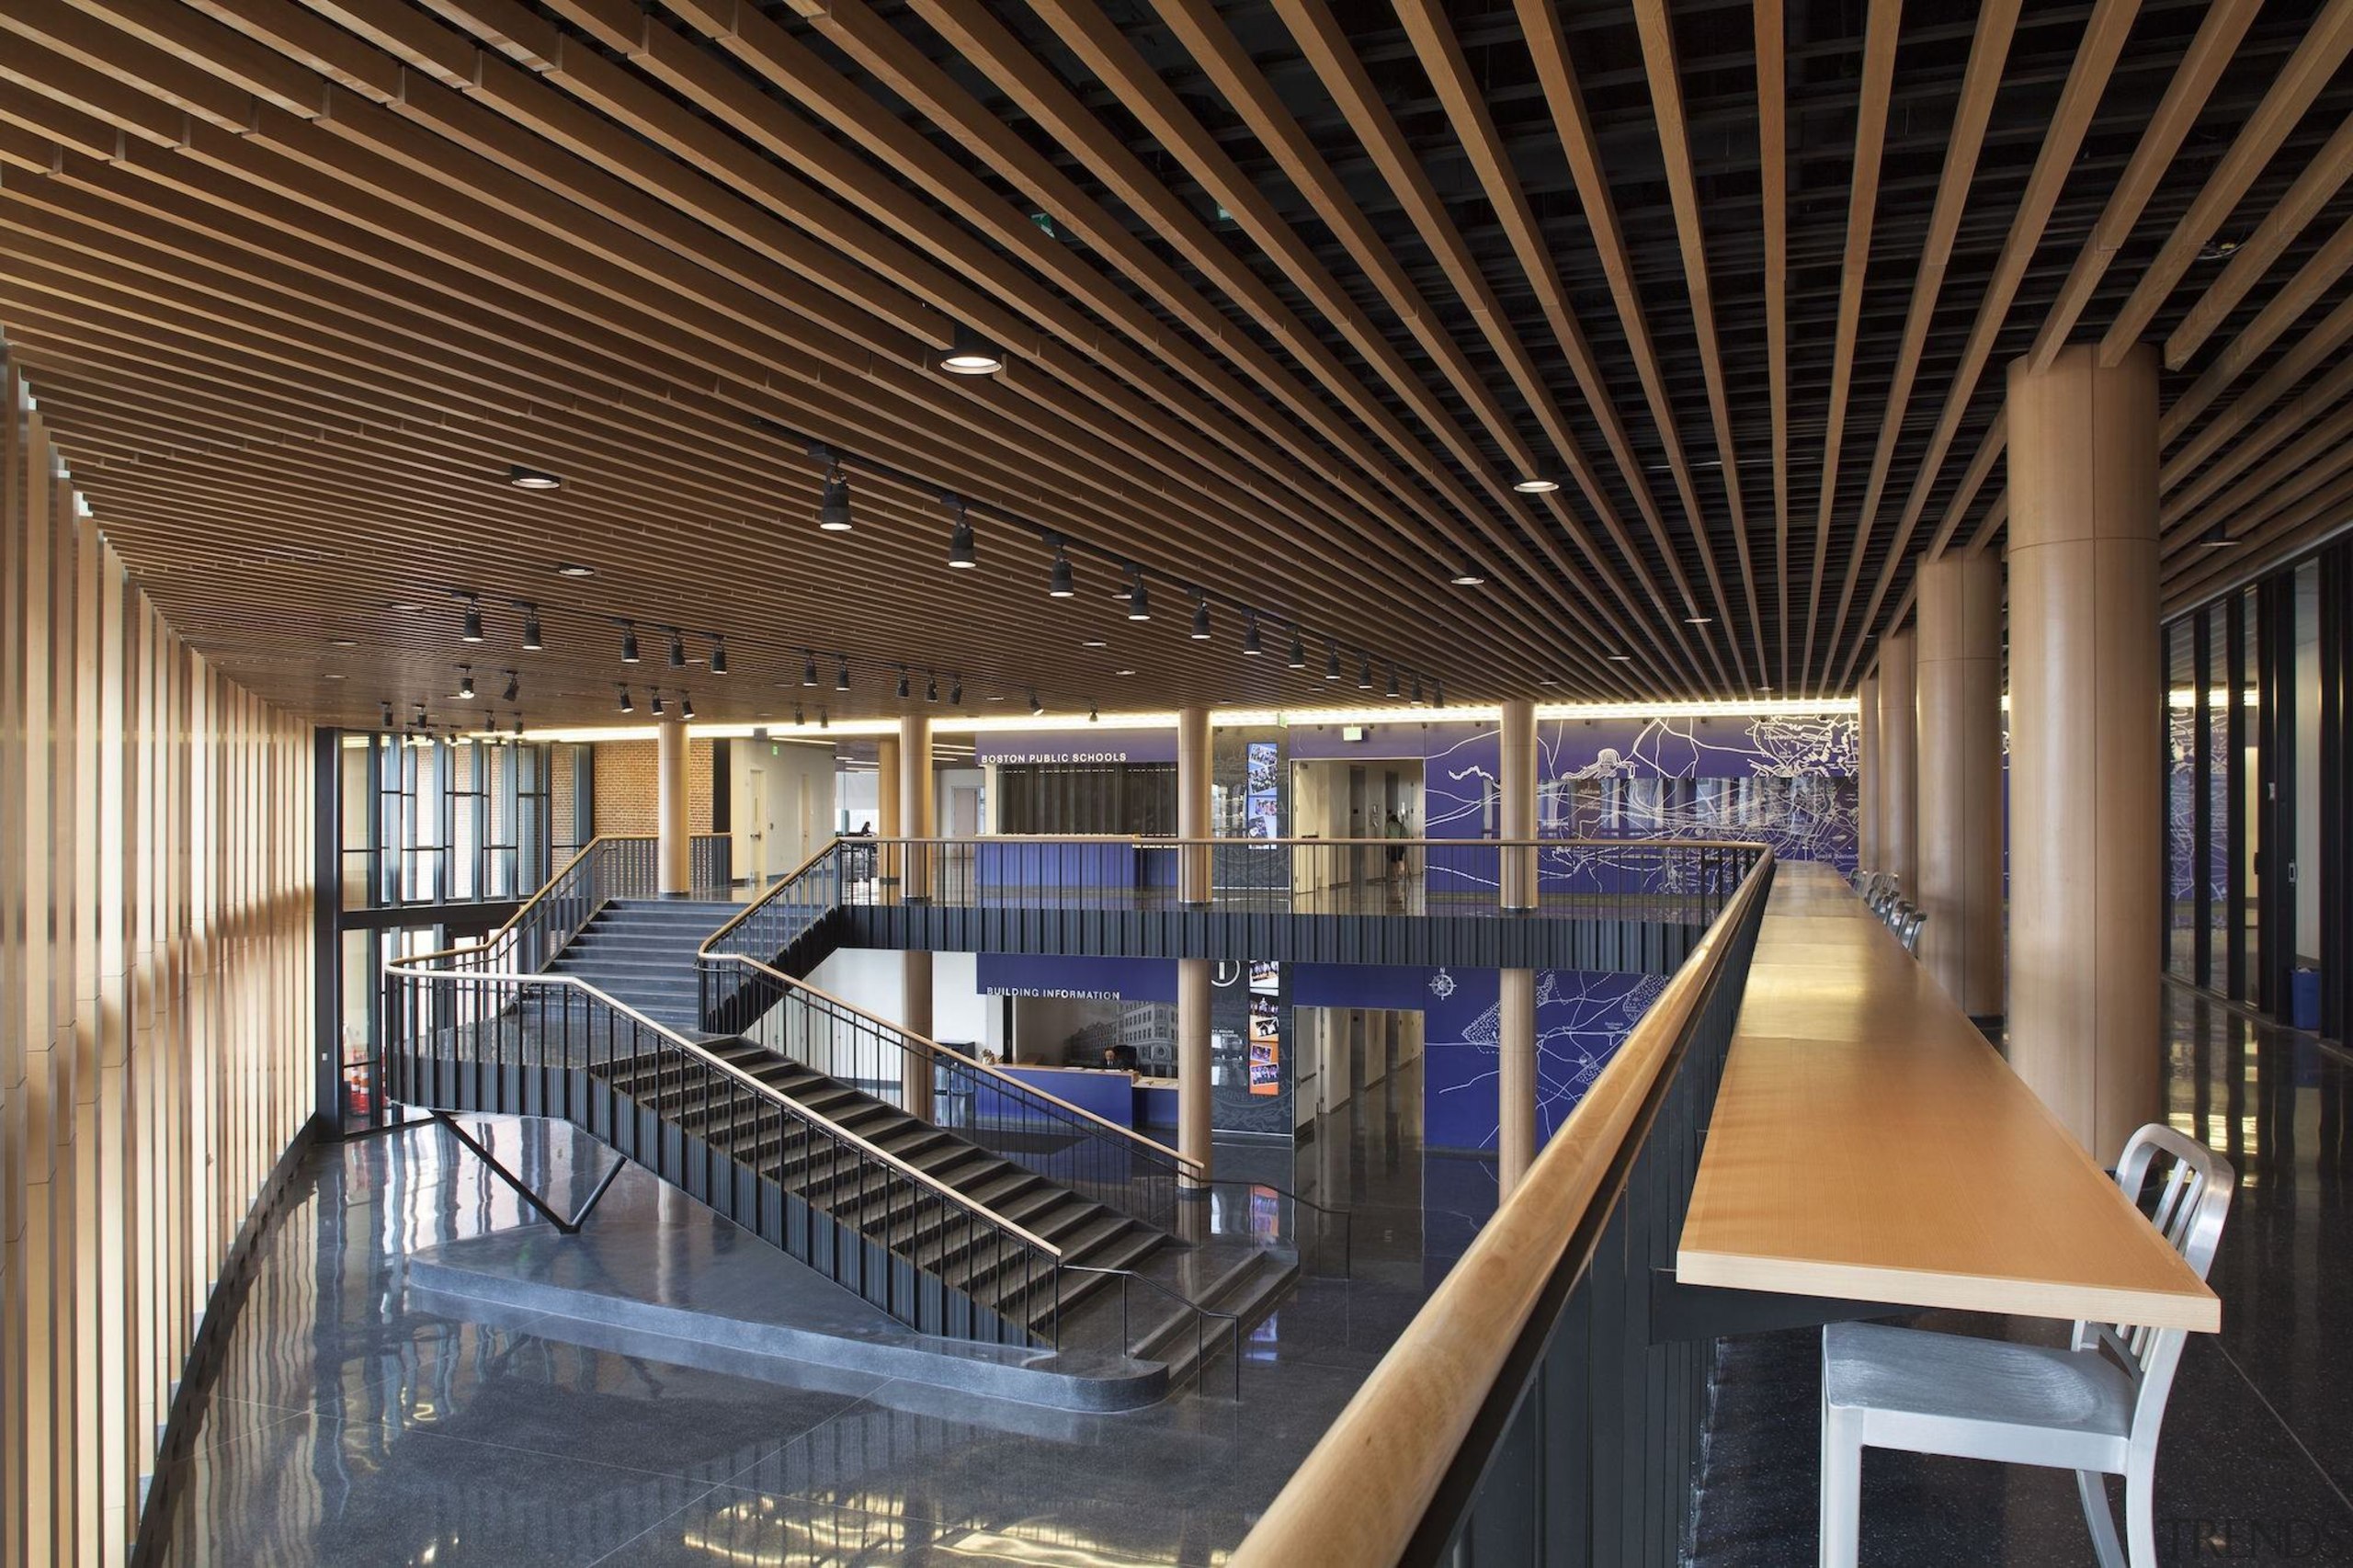 Bruce C. Bolling Municipal Building - Bruce C. architecture, ceiling, daylighting, interior design, lobby, brown